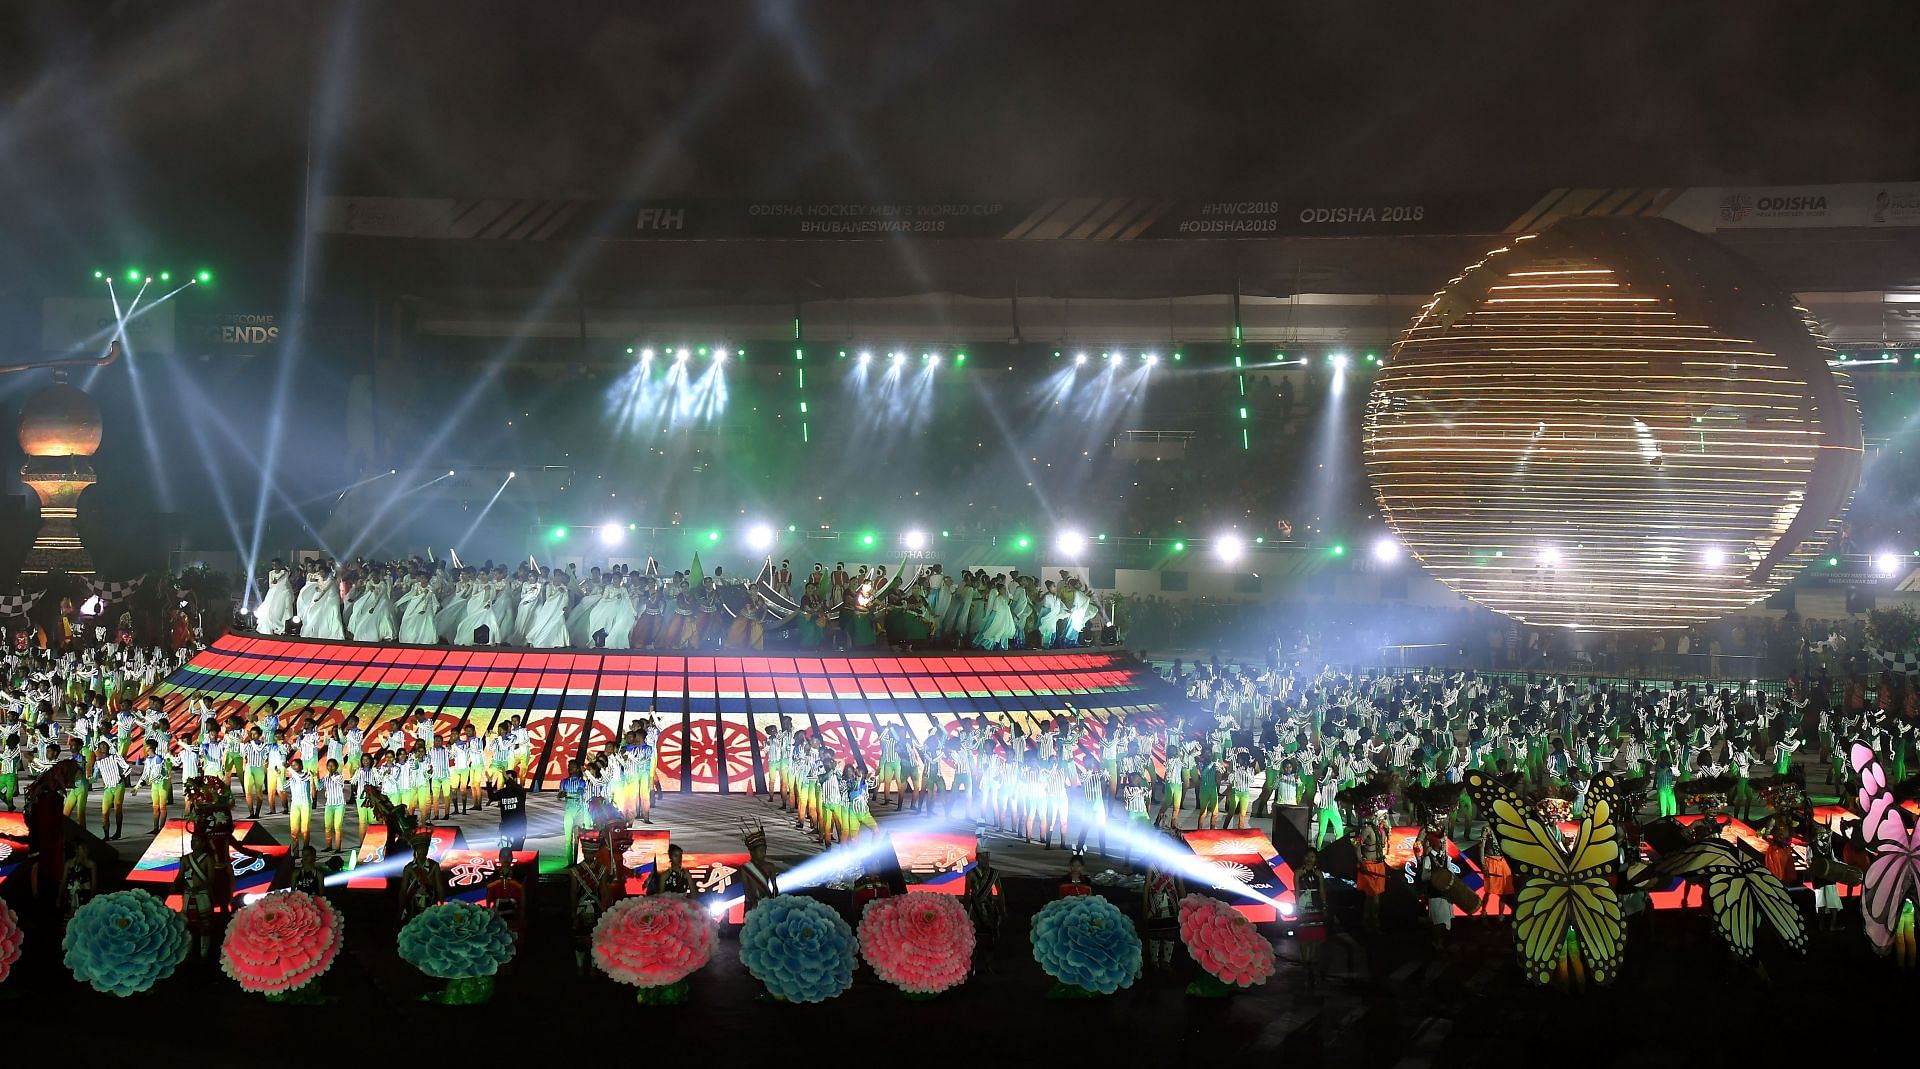 FIH Men&#039;s Hockey World Cup: Opening Ceremony in Odisha. The State&#039;s contribution towards nurturing sports received special praise from FICCI Director-General, Mr. Arun Chawla